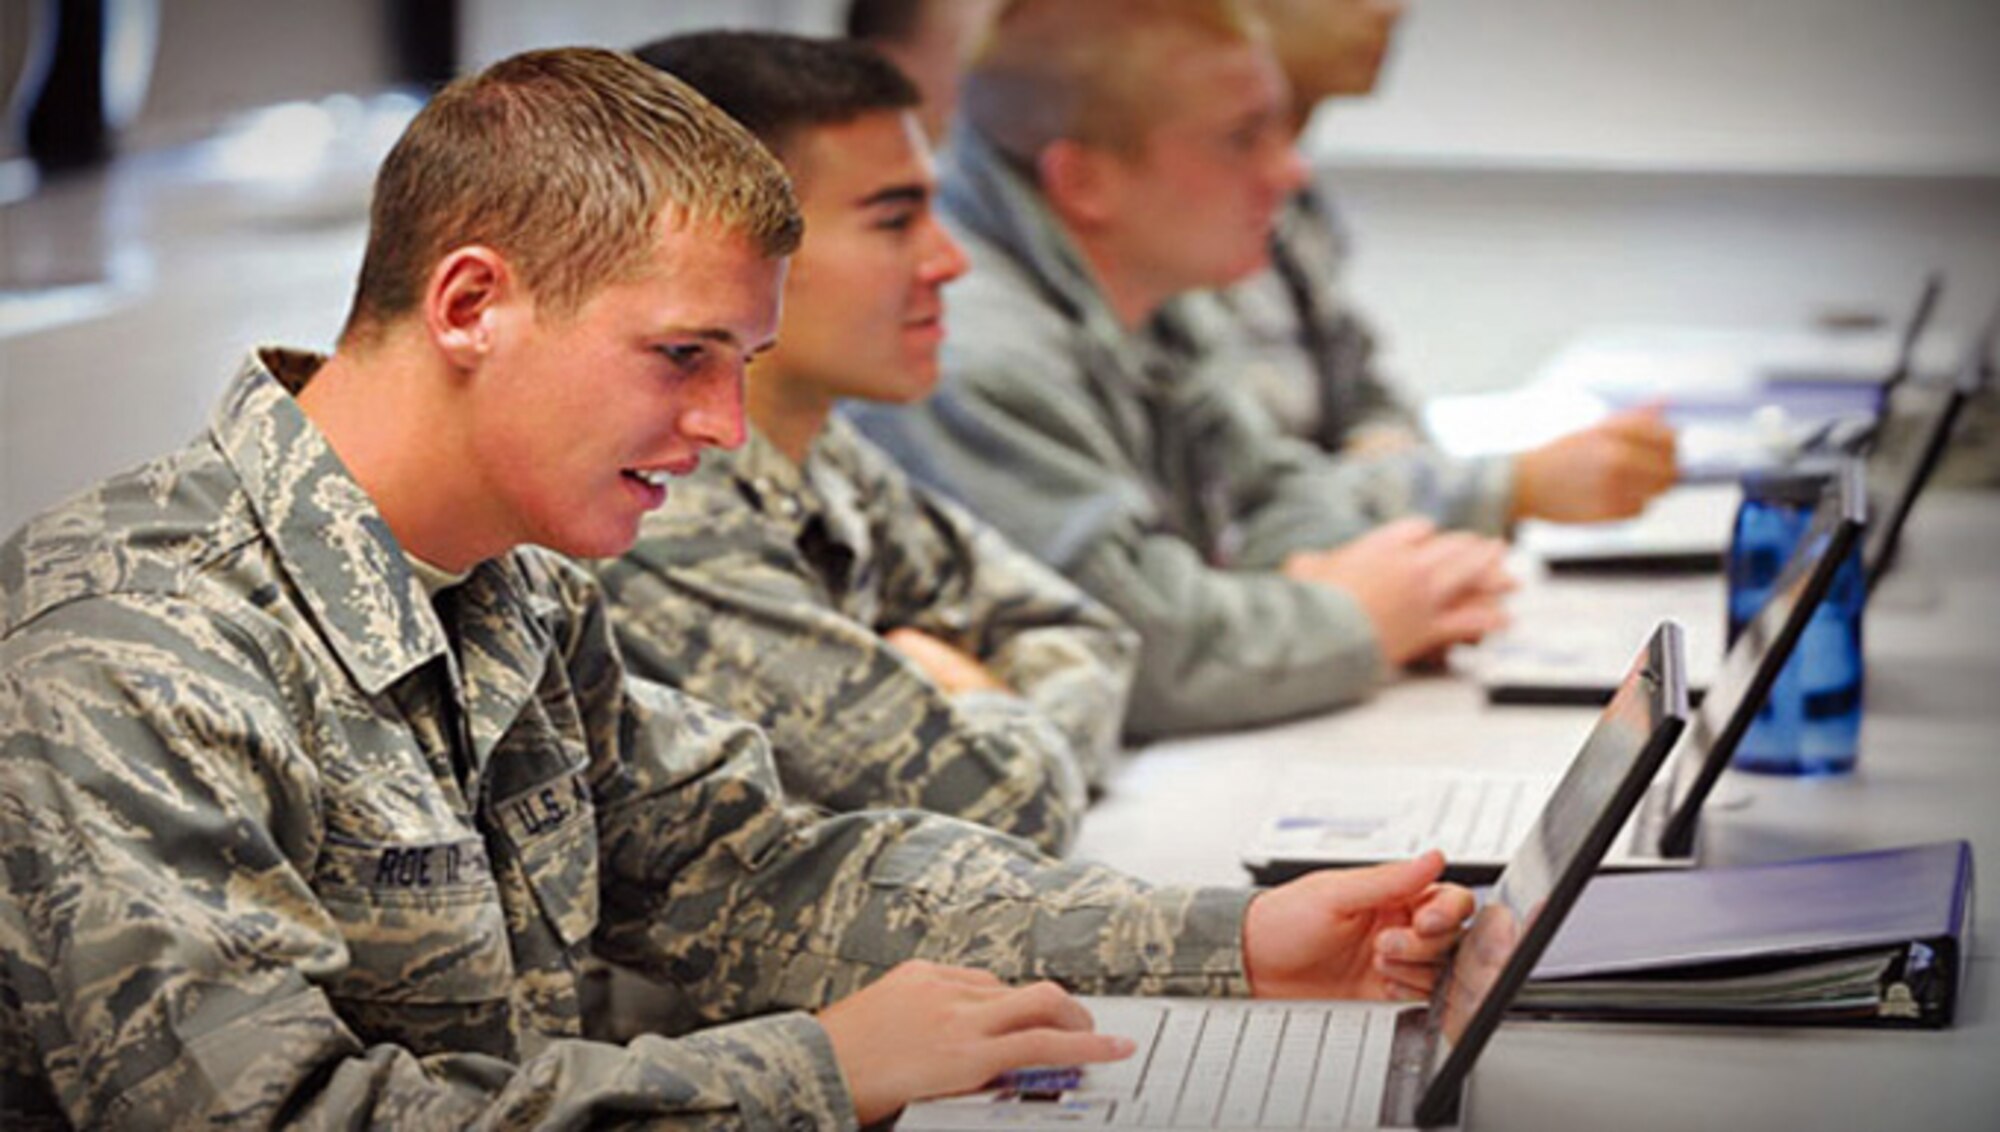 Airmen study using Air Force Network-powered laptops, made possible by the Program Executive Office for Command, Control, Communications, Intelligence and Networks at Hanscom Air Force Base, Mass. (U.S. Air Force stock photo)